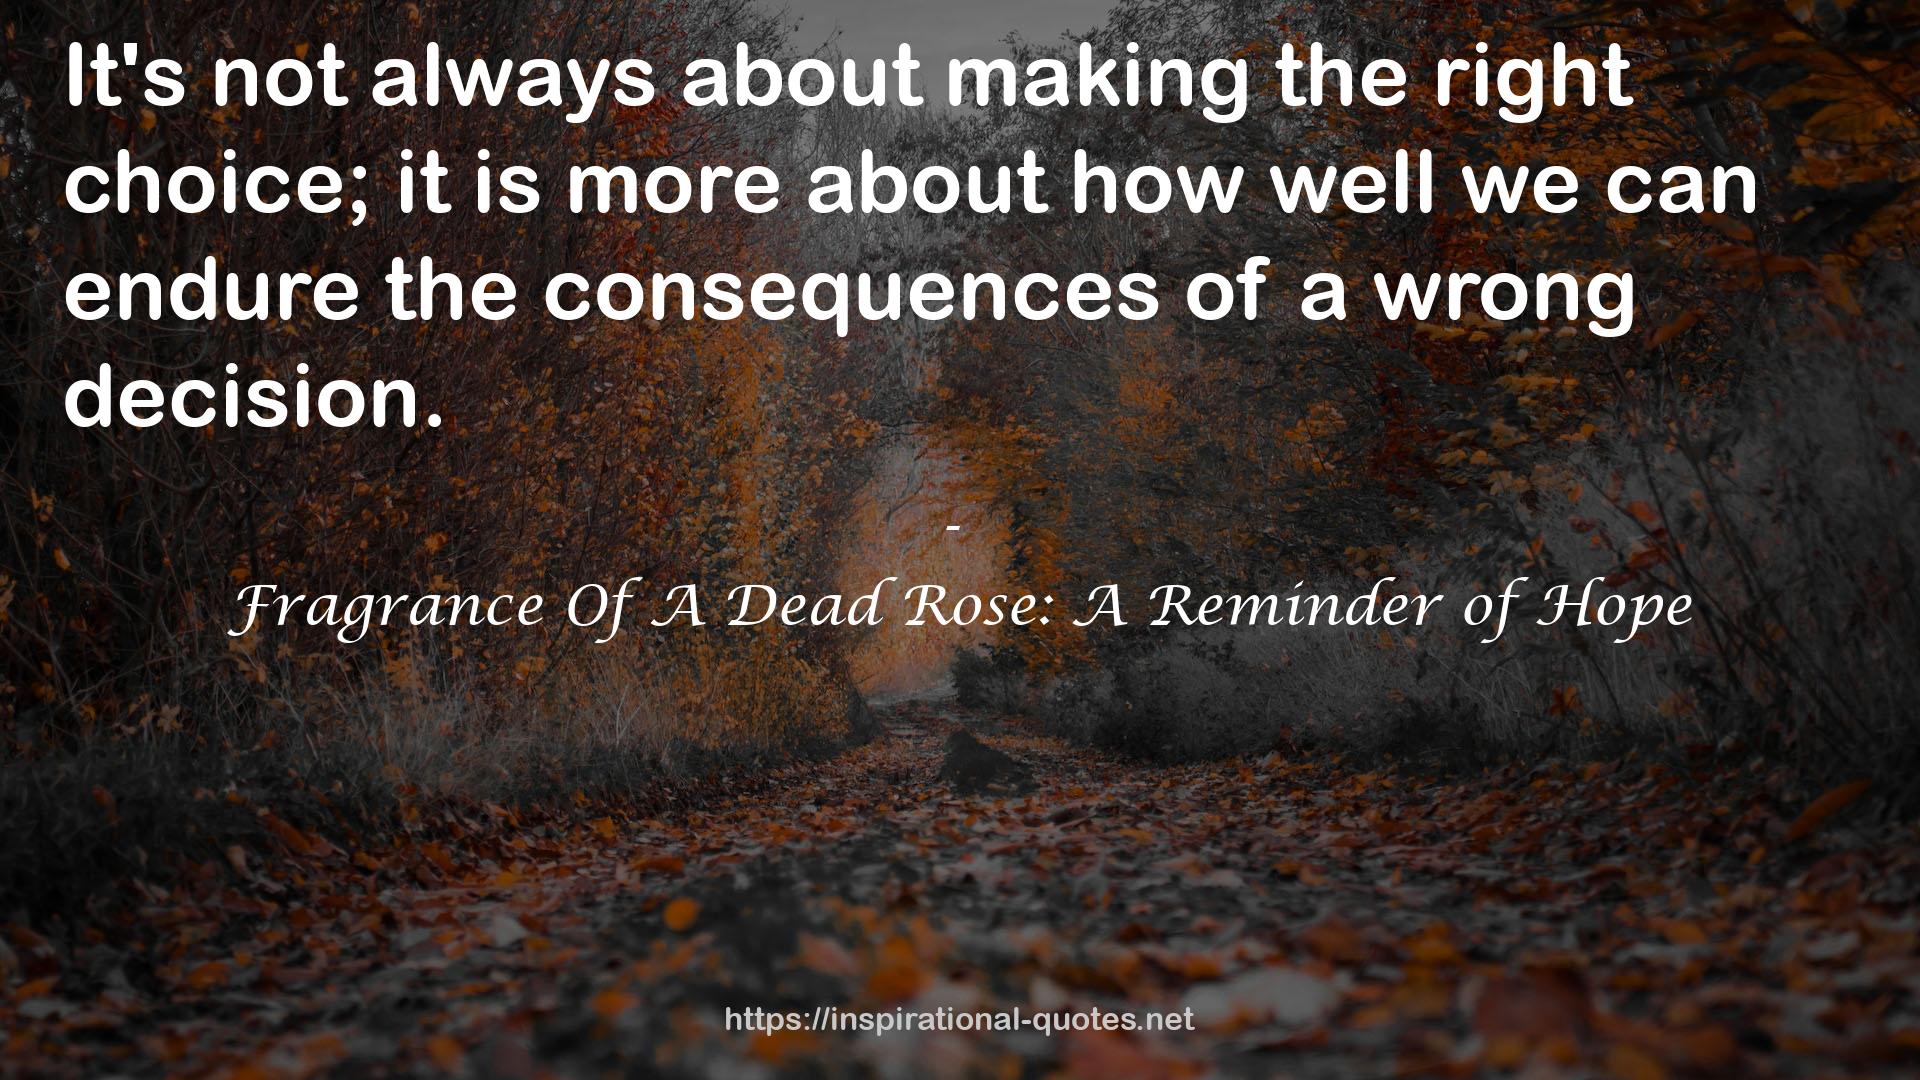 Fragrance Of A Dead Rose: A Reminder of Hope QUOTES